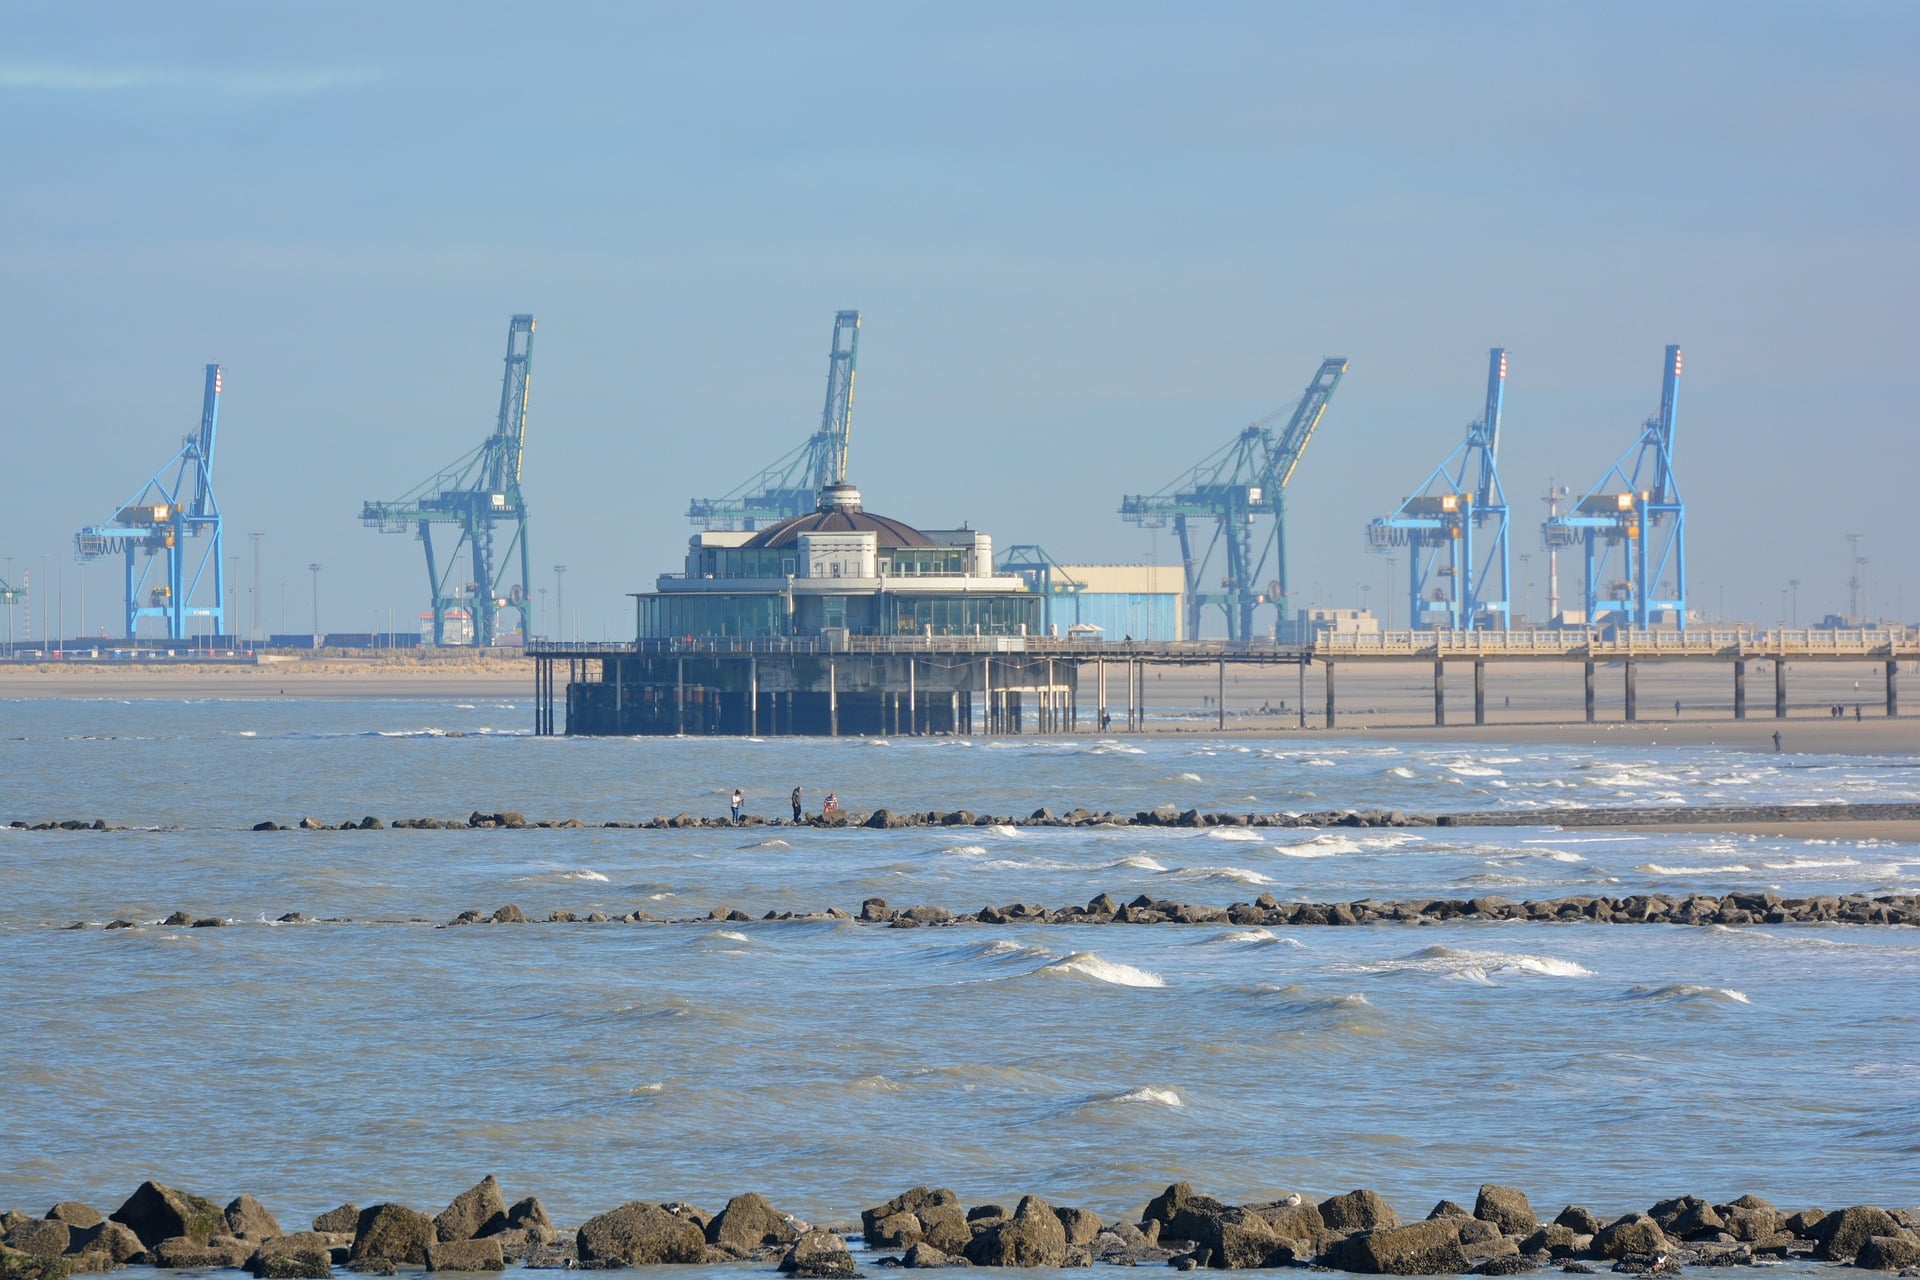 Zeebrugge offers stunning sea views and easy access to the beach